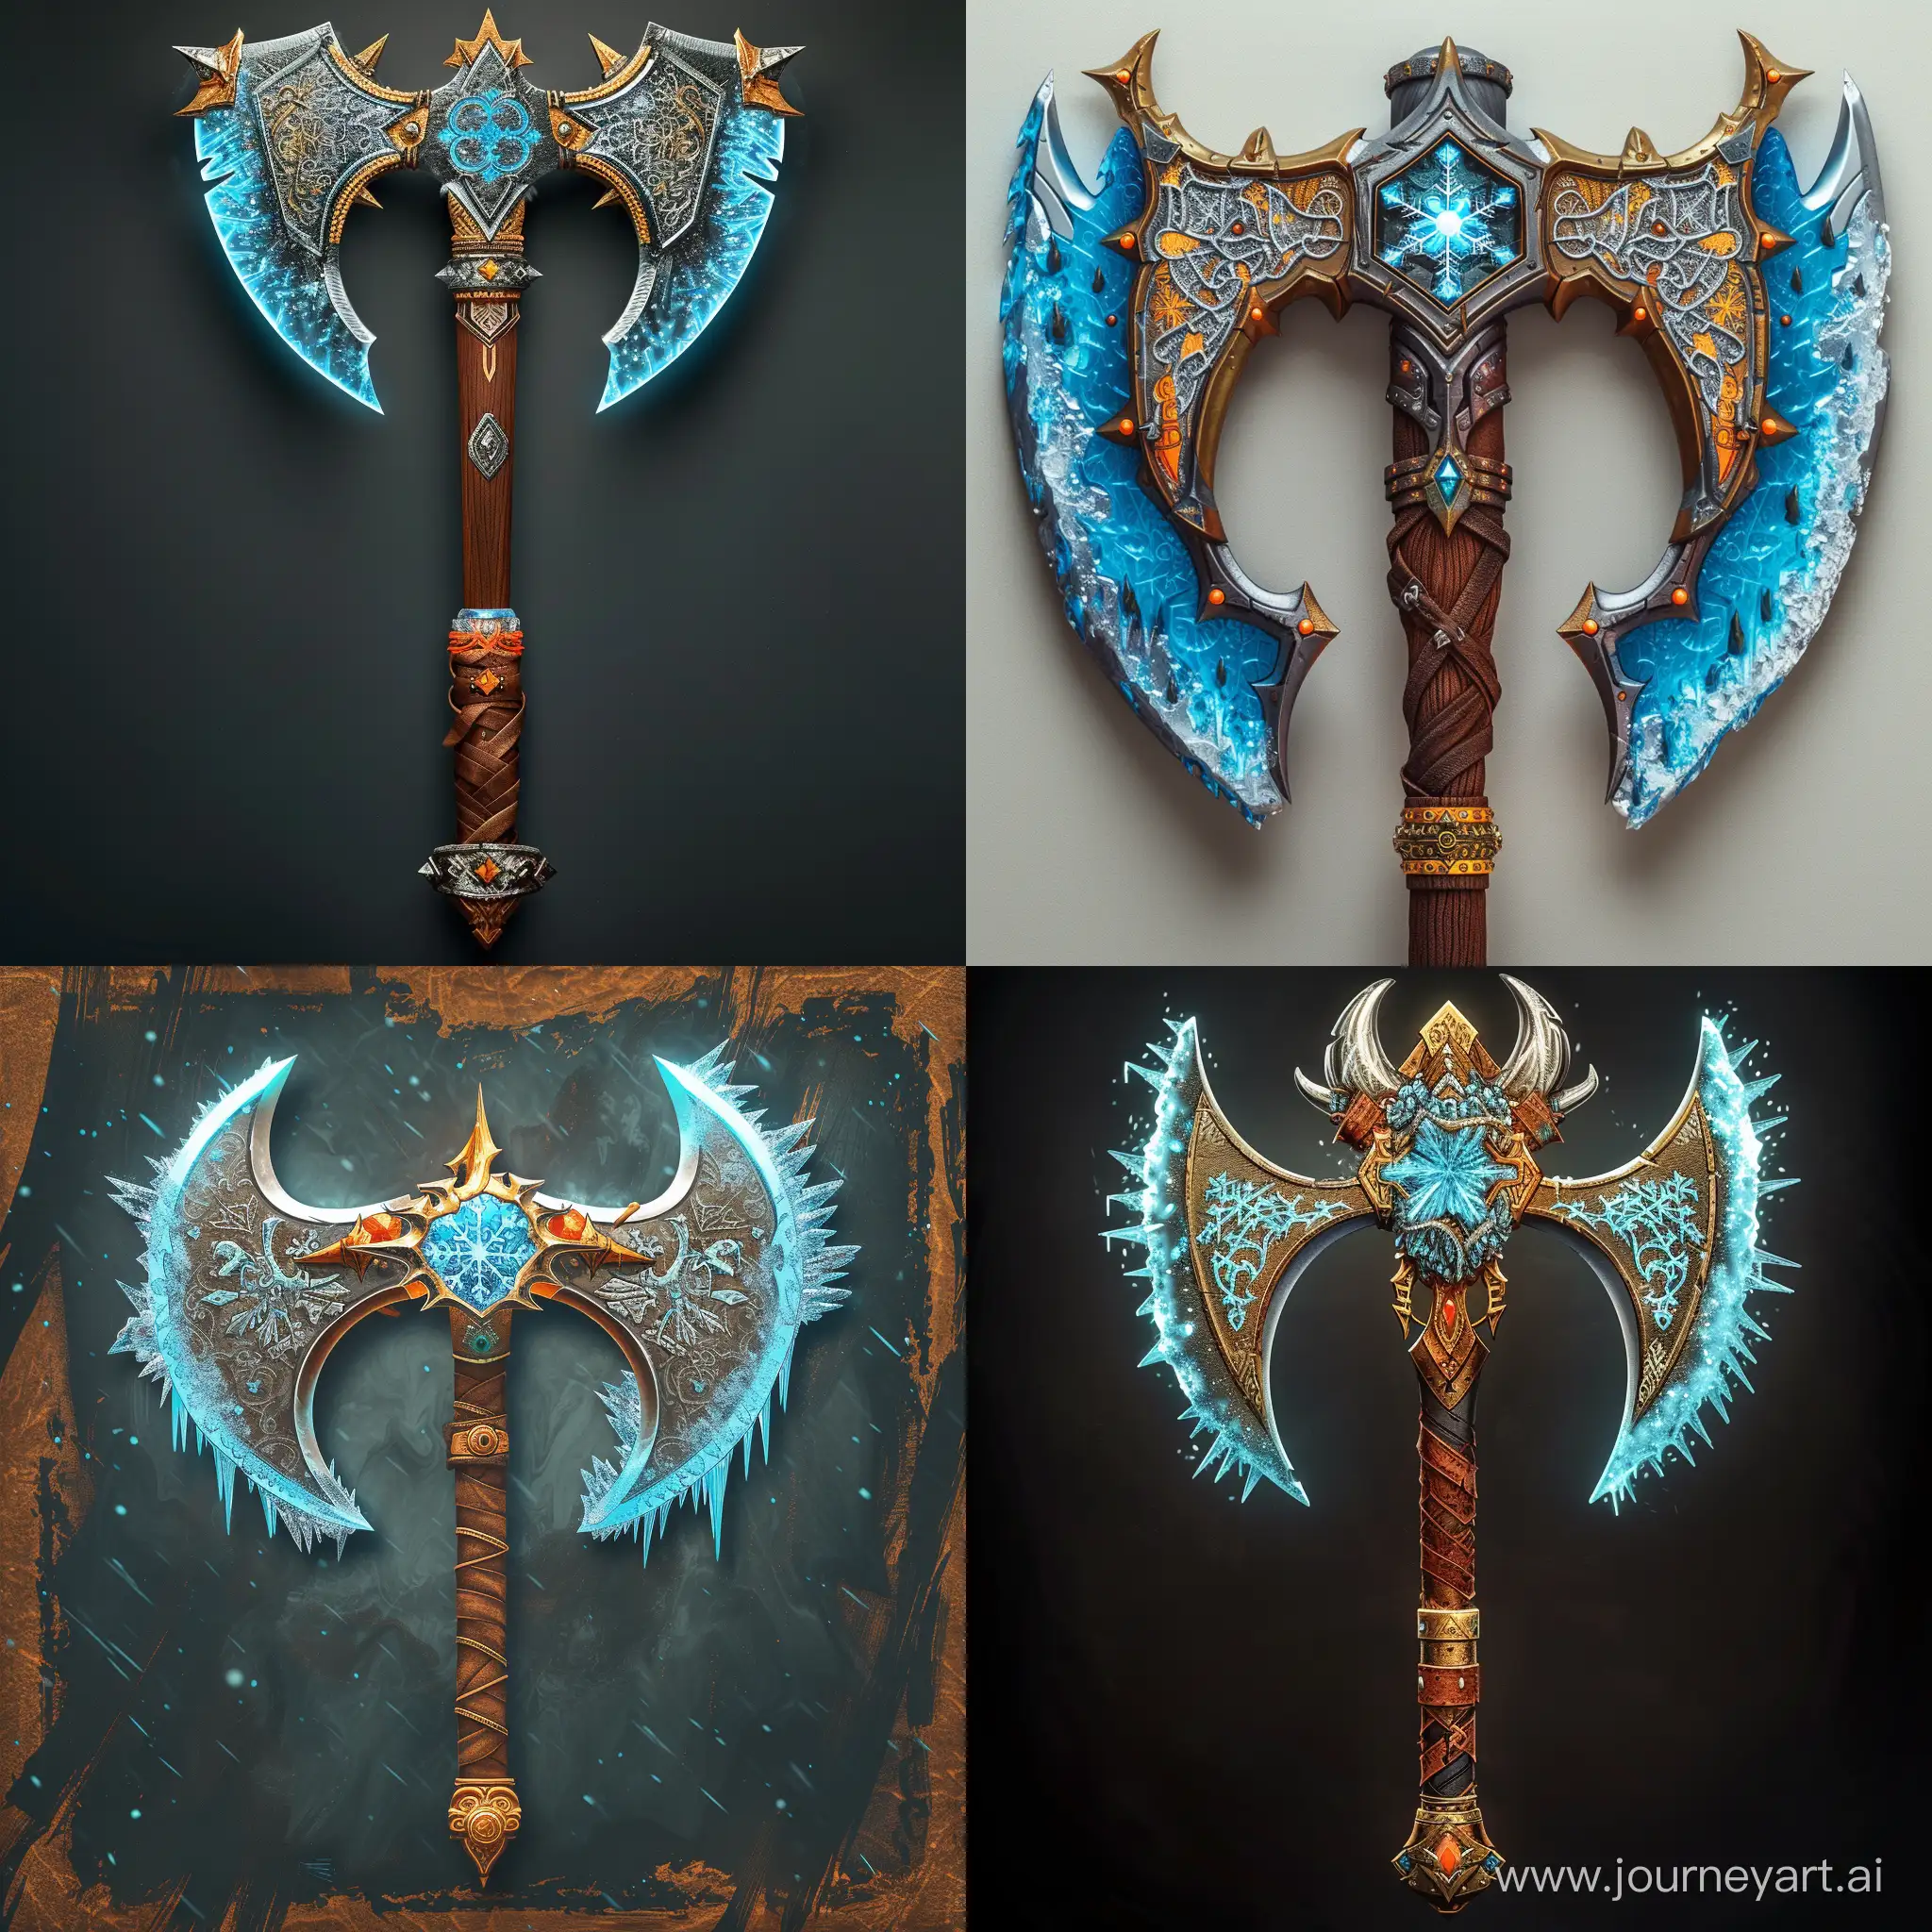 Create an image of a fantasy battle axe that embodies both the elements of ice and traditional blacksmith craftsmanship. The axe head should be symmetrical with a central blade that has a glowing blue edge to suggest magical frost power. Flank this with two curved side blades, each resembling a beast's fang, complete with intricate snowflake engravings that evoke a sense of encrusted ice. The haft is a deep brown, wrapped in leather for grip, leading to a pommel that is a miniature replica of the axe's head. Embellish the haft with golden bands and orange jewels to signify rarity and high status. The overall color palette should contrast strikingly with blues, browns, golds, and oranges to highlight the weapon's deadly nature and possible enchantments.